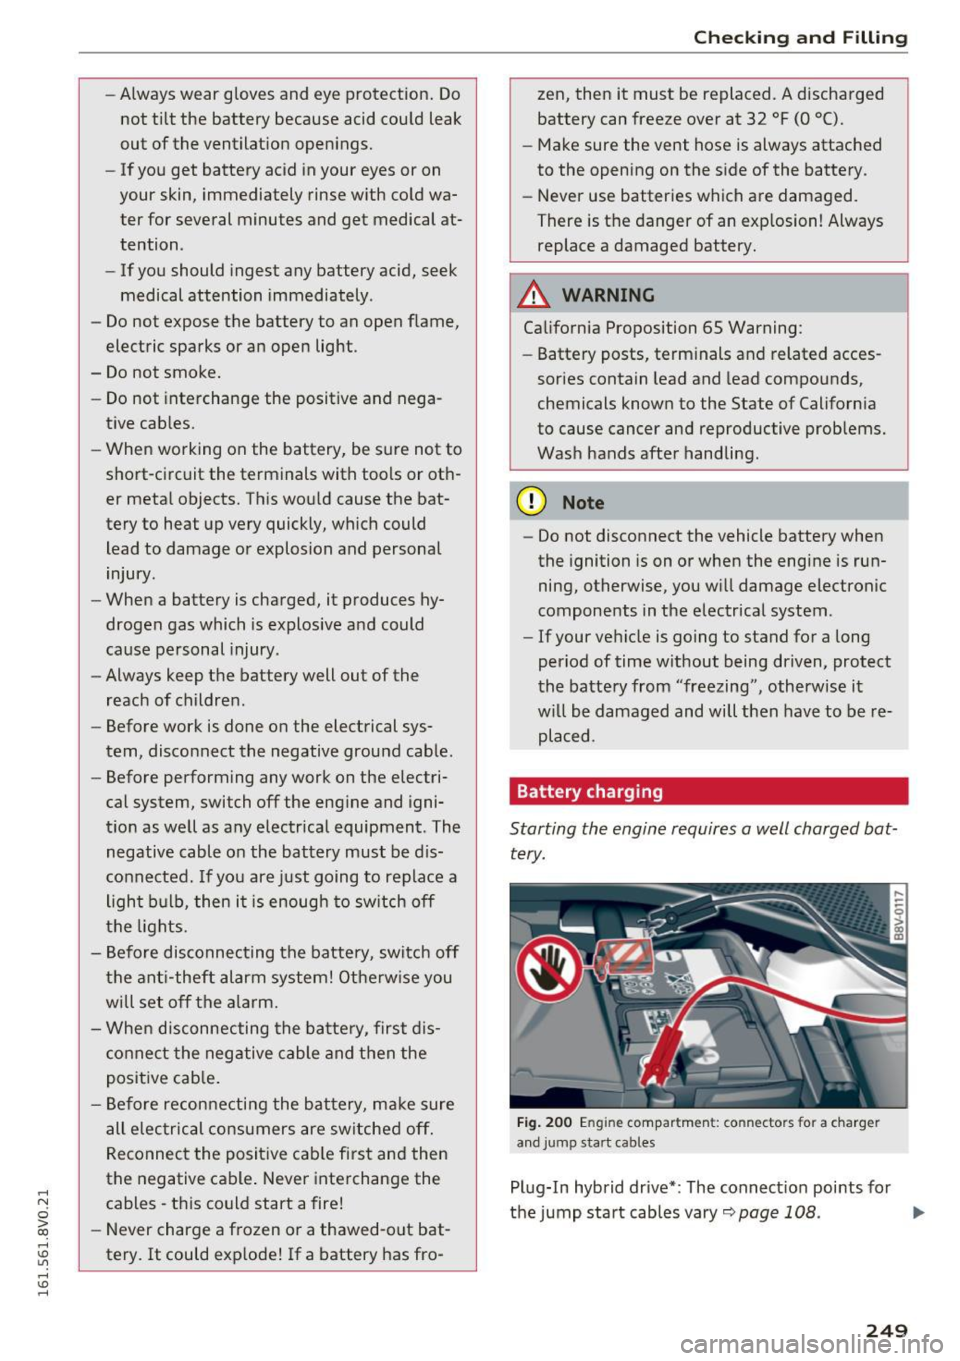 AUDI S3 2016  Owners Manual .... N 
0 > CX) 
.... I.Cl U"I 
.... I.Cl .... 
-Always  wear gloves  and  eye  protection.  Do 
not  tilt  the  battery  because  acid  could  leak 
out  of the  ventilation  openings. 
- If  you  ge